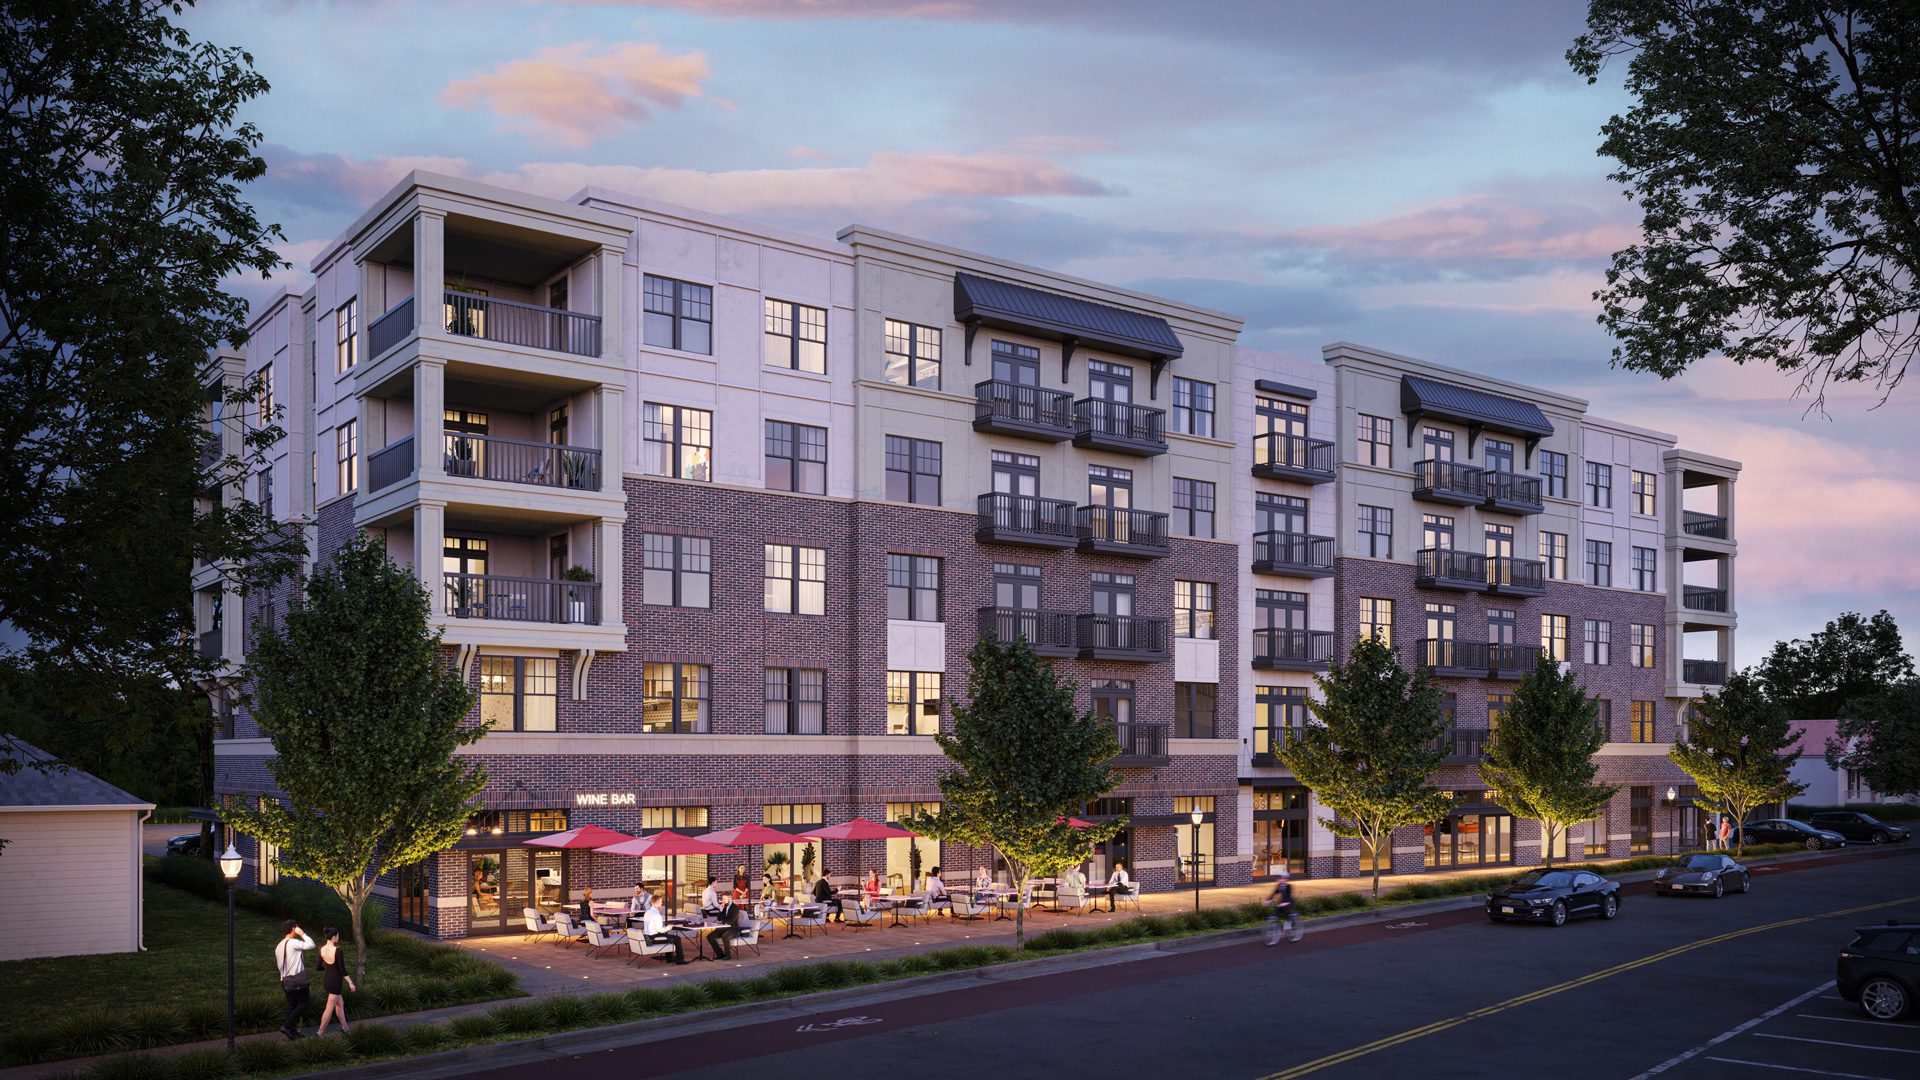 The Venue on South Main in Cornelius rendering of 5-story building at dusk with outdoor patio and residential above